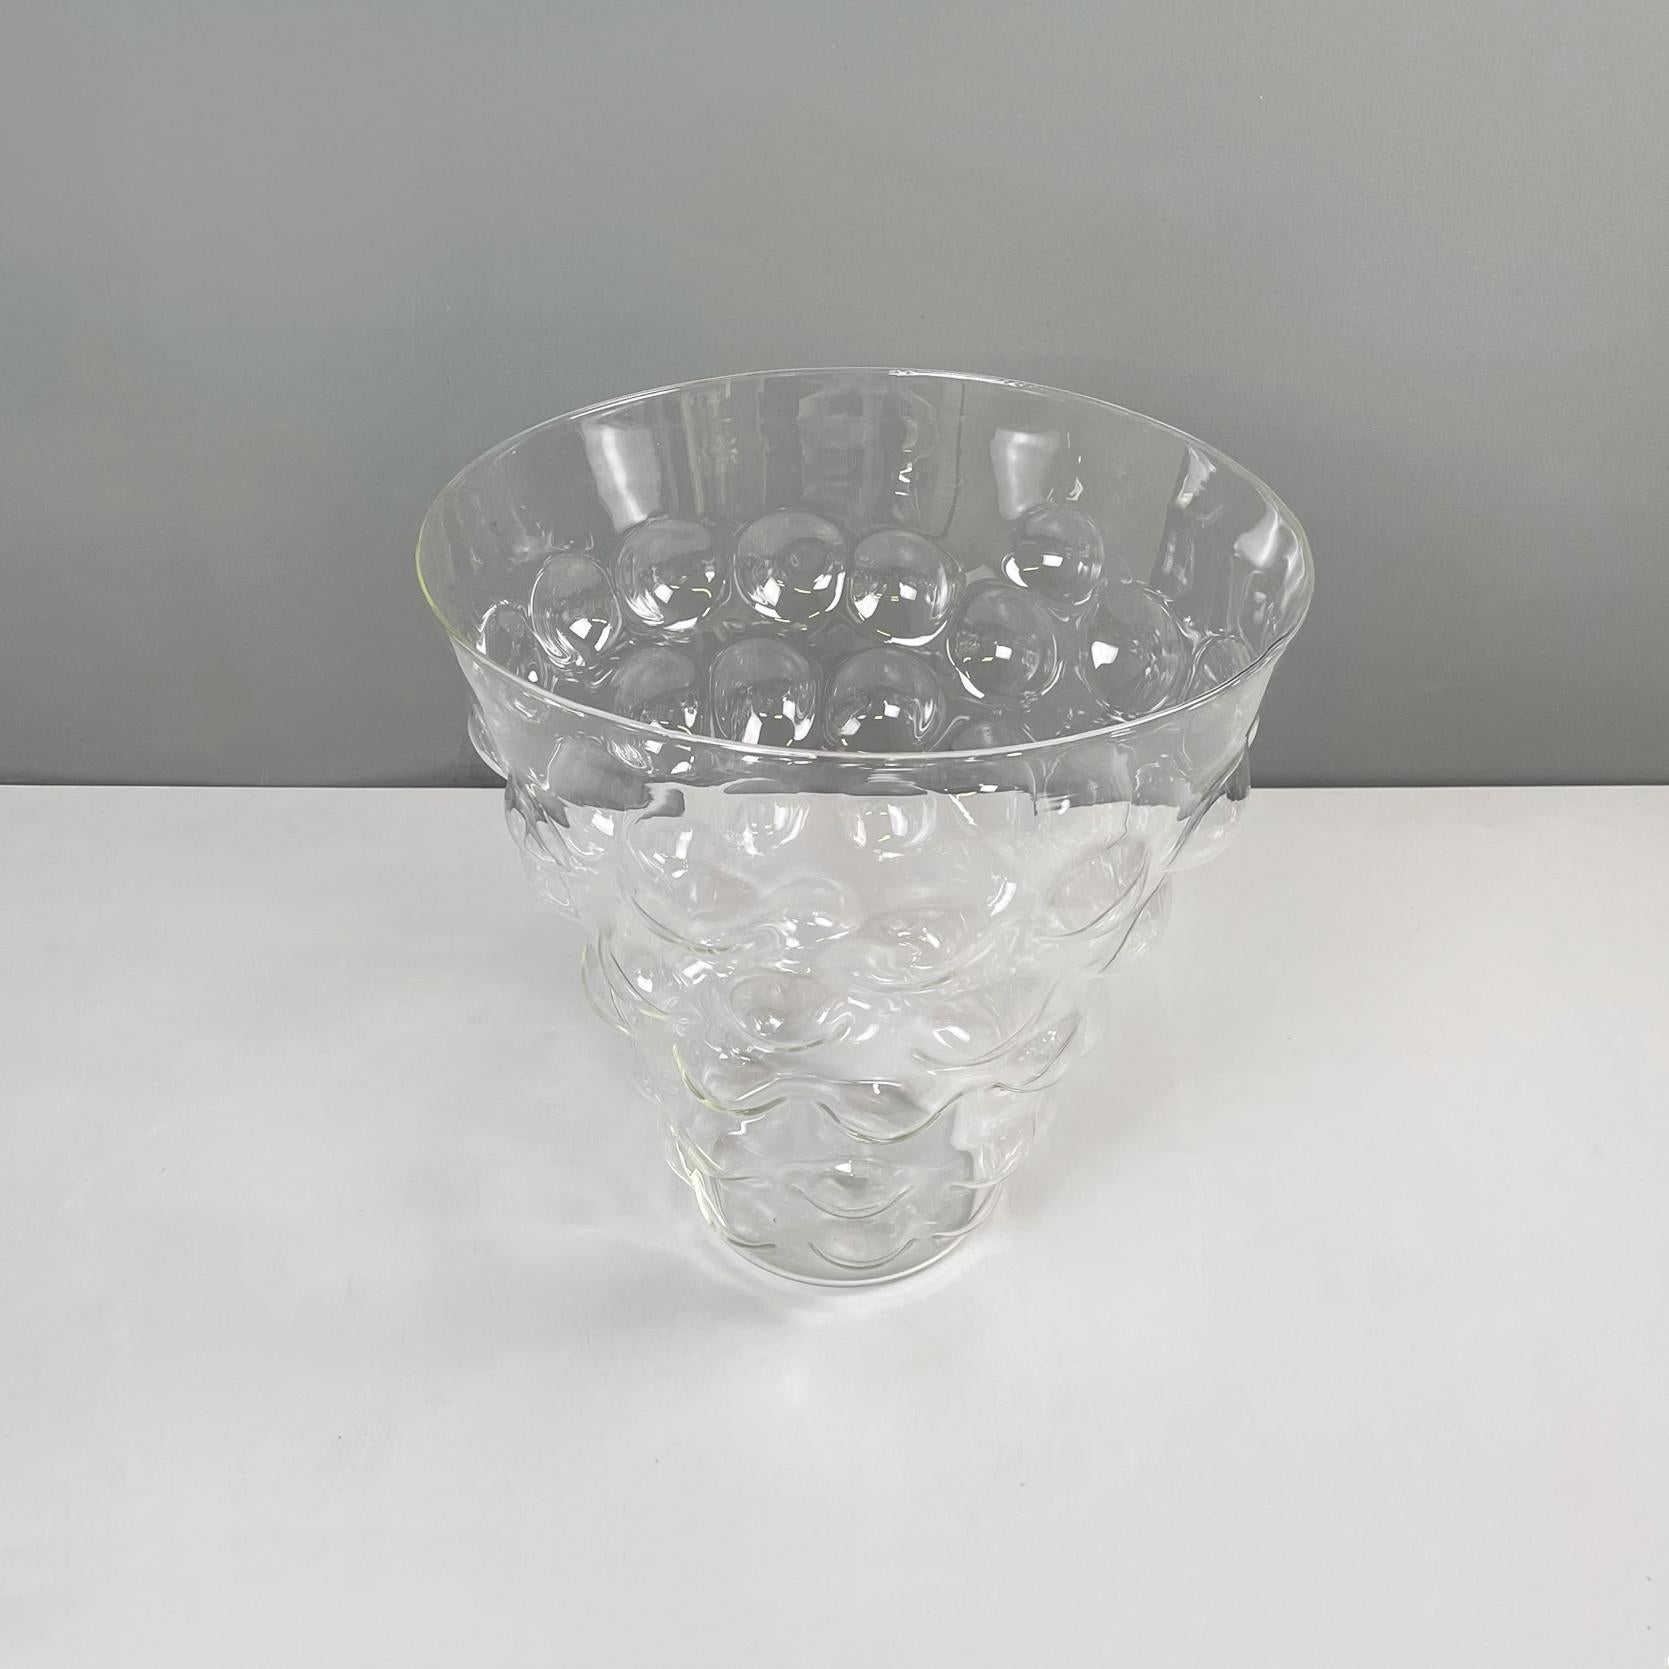 Italian modern Glass vase with glass bubble by Roberto Faccioli, 1990s
Round base vase in finely worked by hand trasparent glass. The structure tends to narrow towards the base and on the whole surface it has a series of protruding hemispheres.